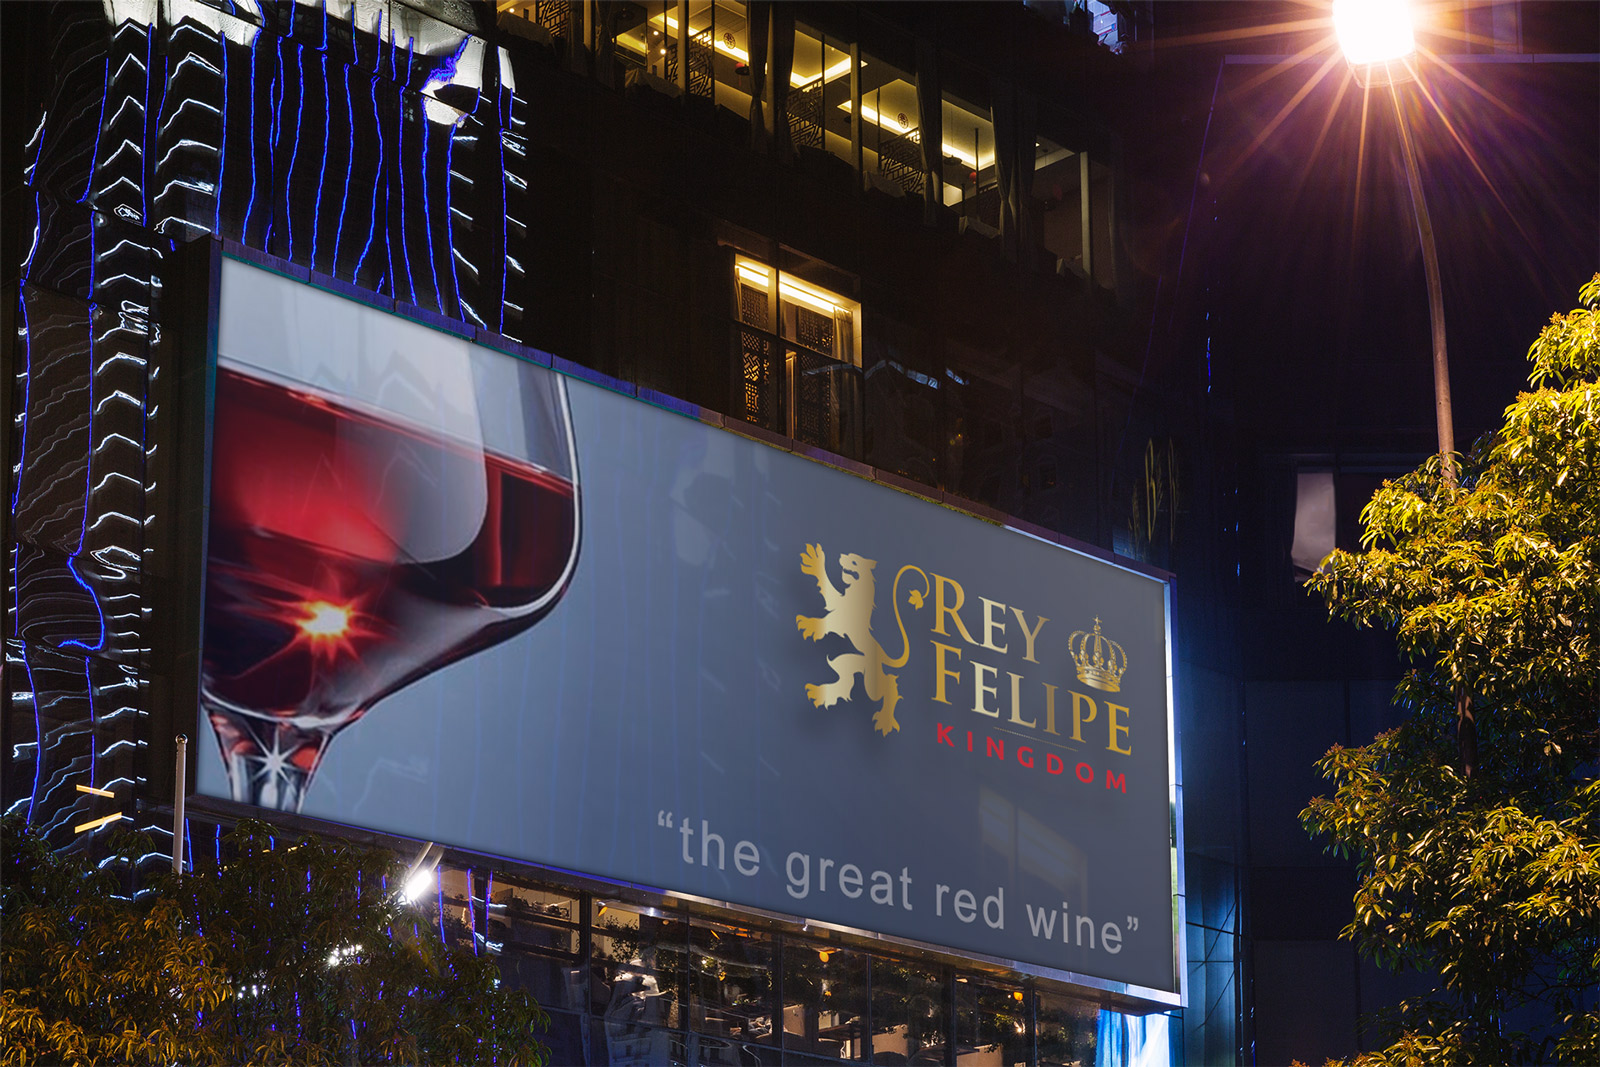 Graphic and creative design of billboards for wine brand marketed in China